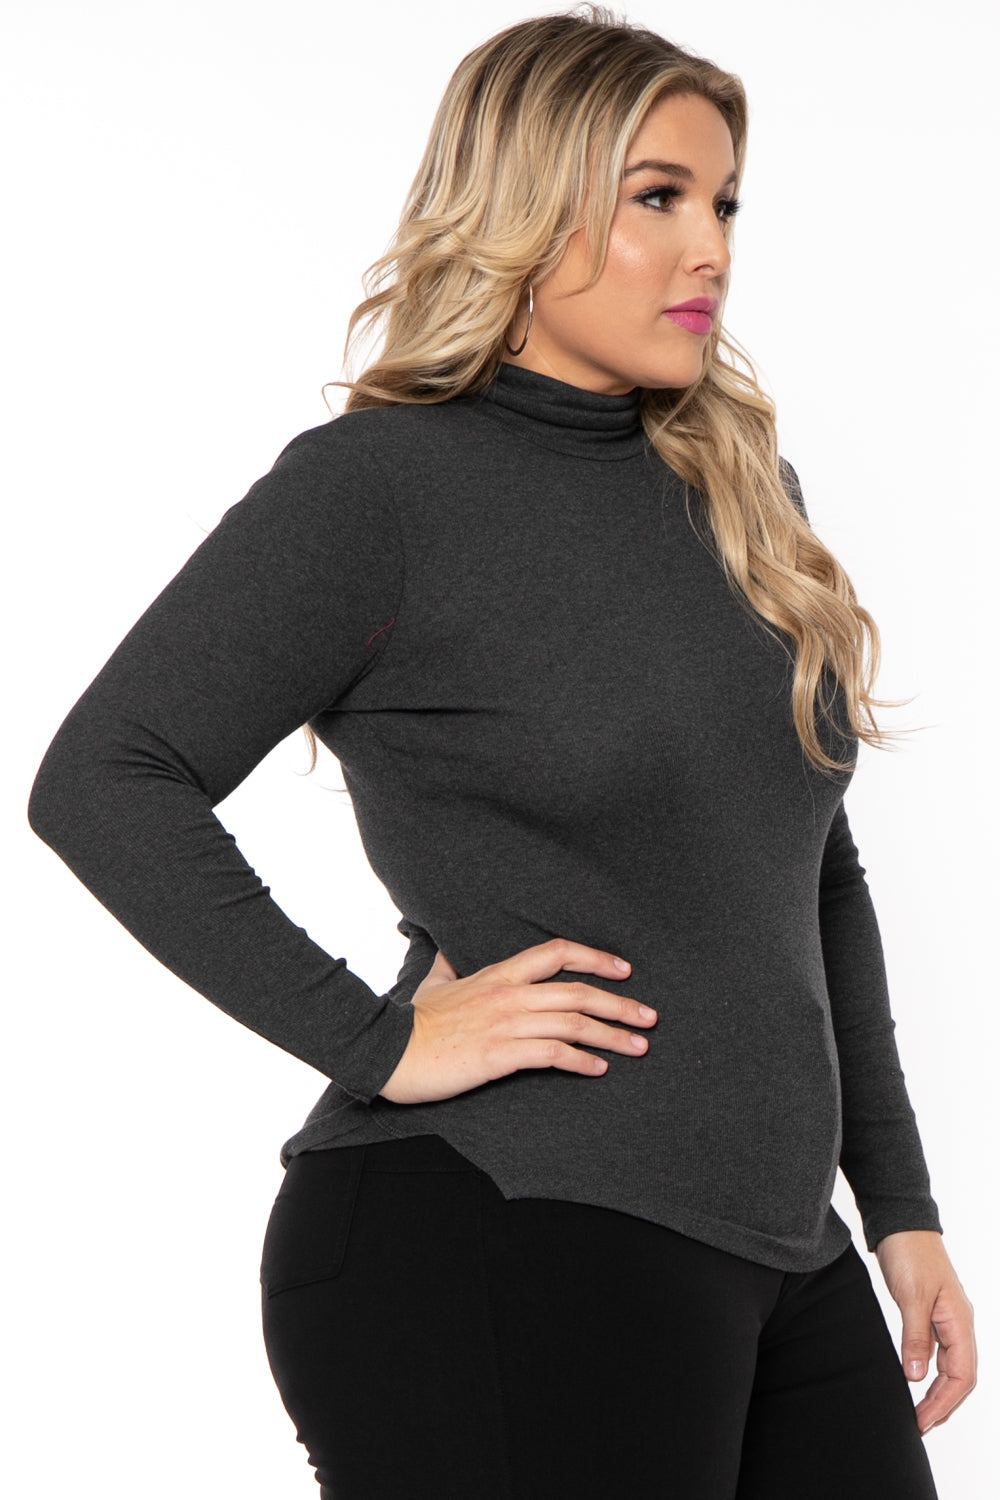 Ambiance Tops Plus Size Ribbed Turtleneck Top - Charcoal